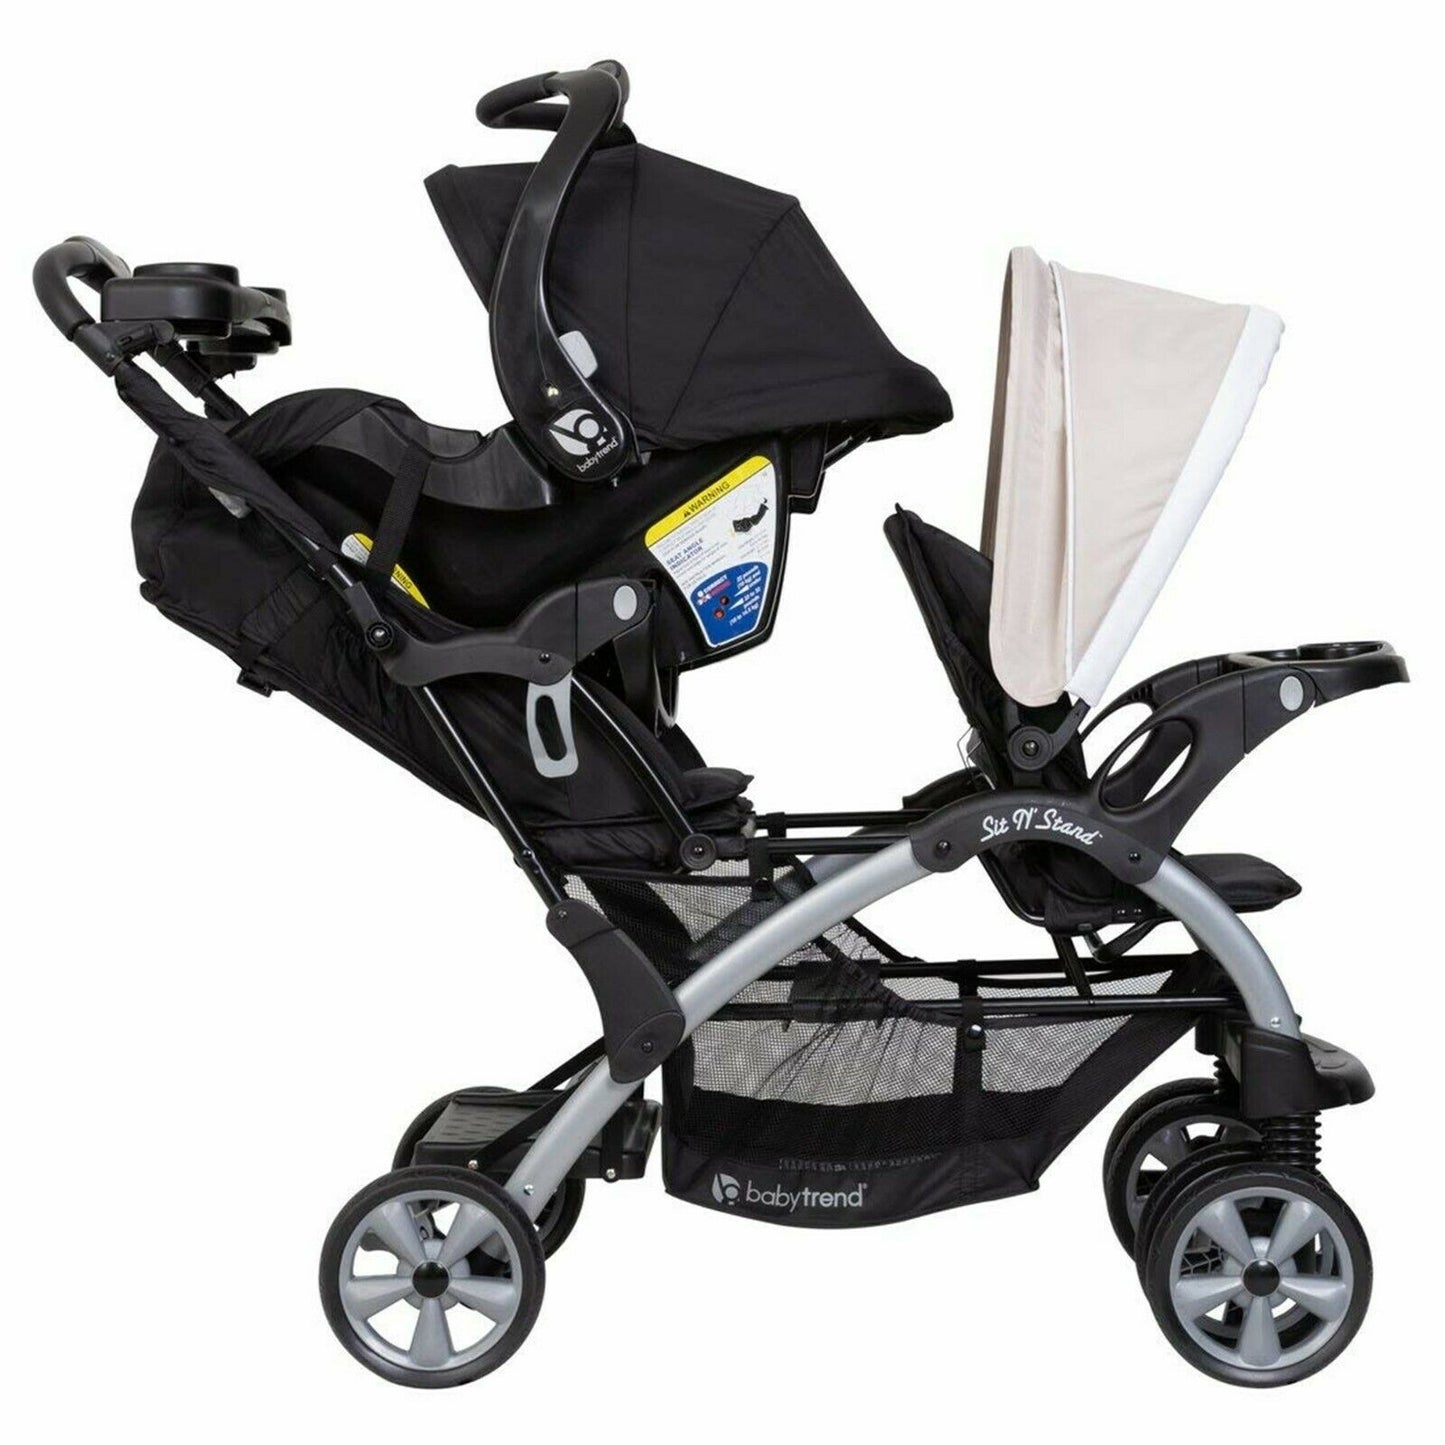 Double Baby Trend Stroller with 2 Car Seat Twin Playard Crib Travel System Combo